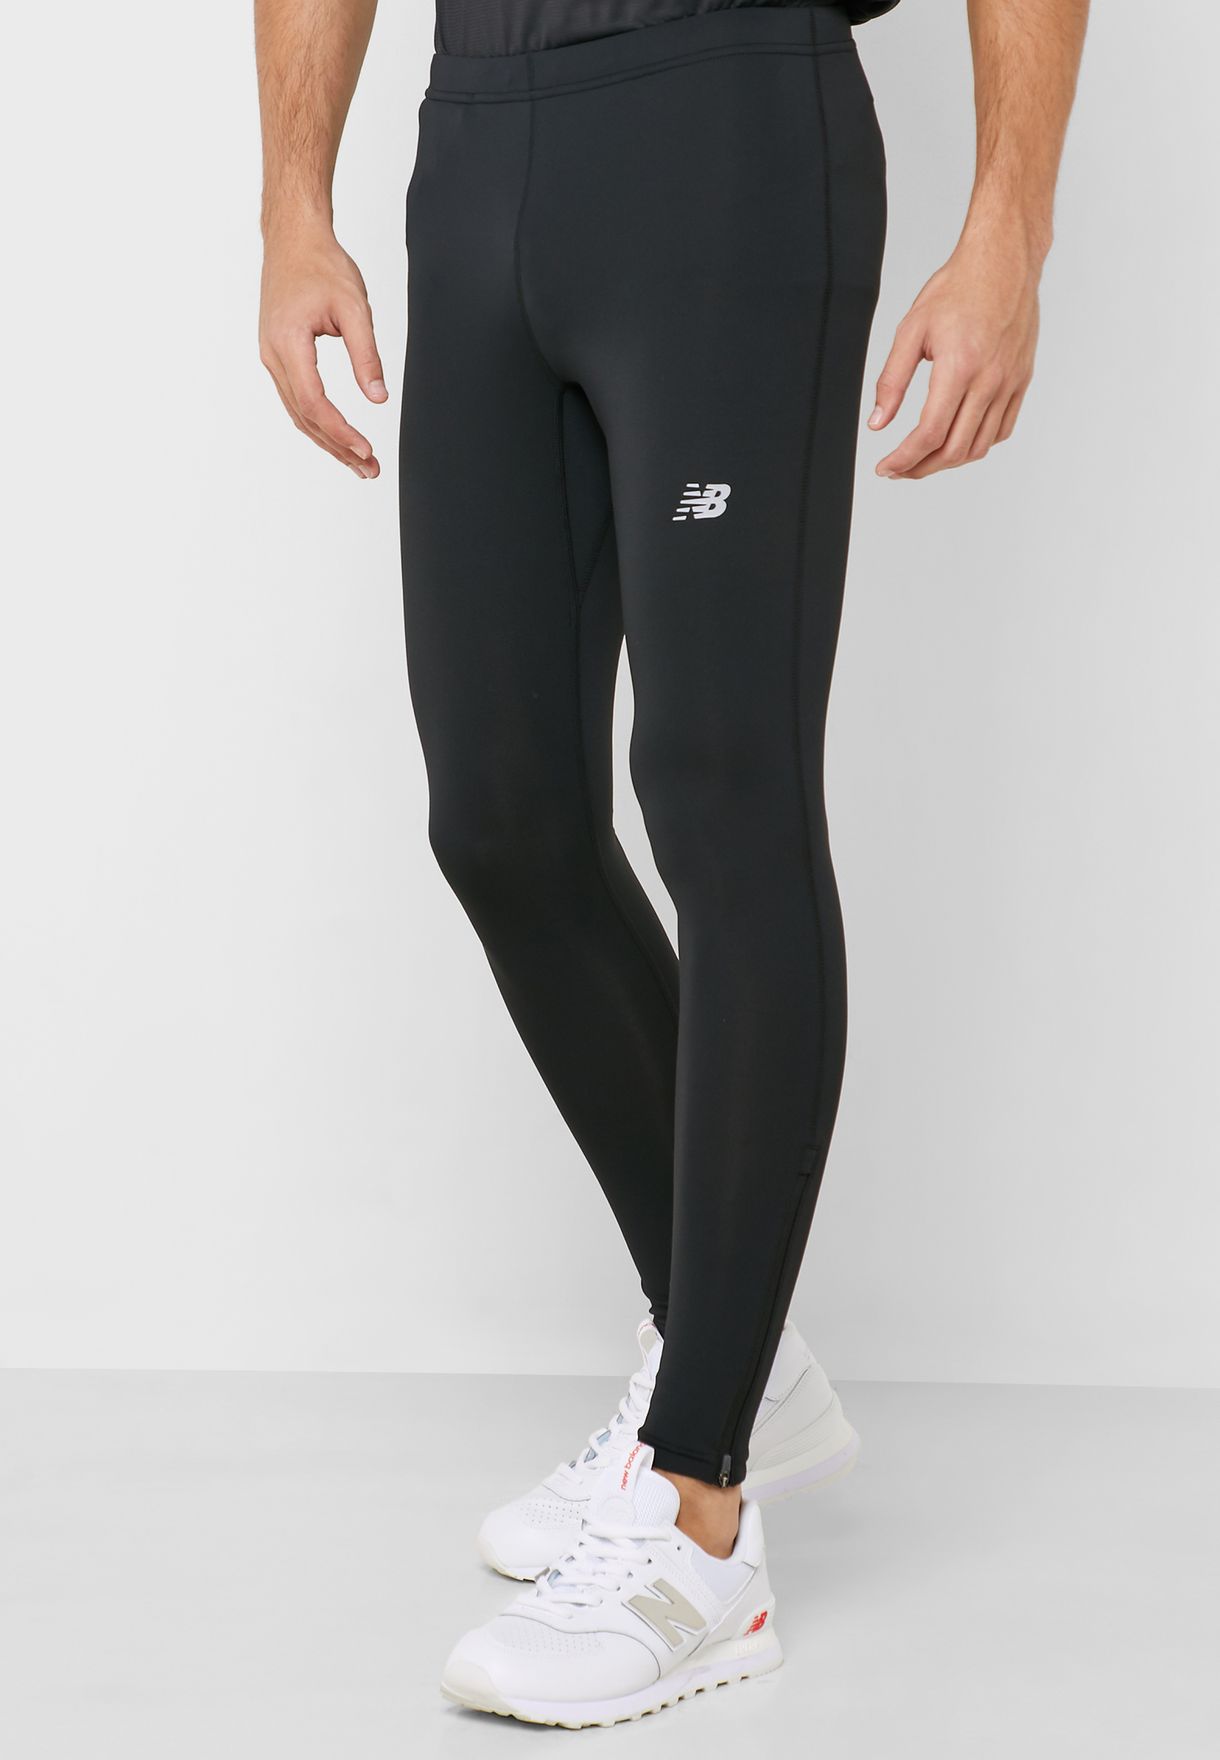 Buy New Balance black Accelerate Tights 